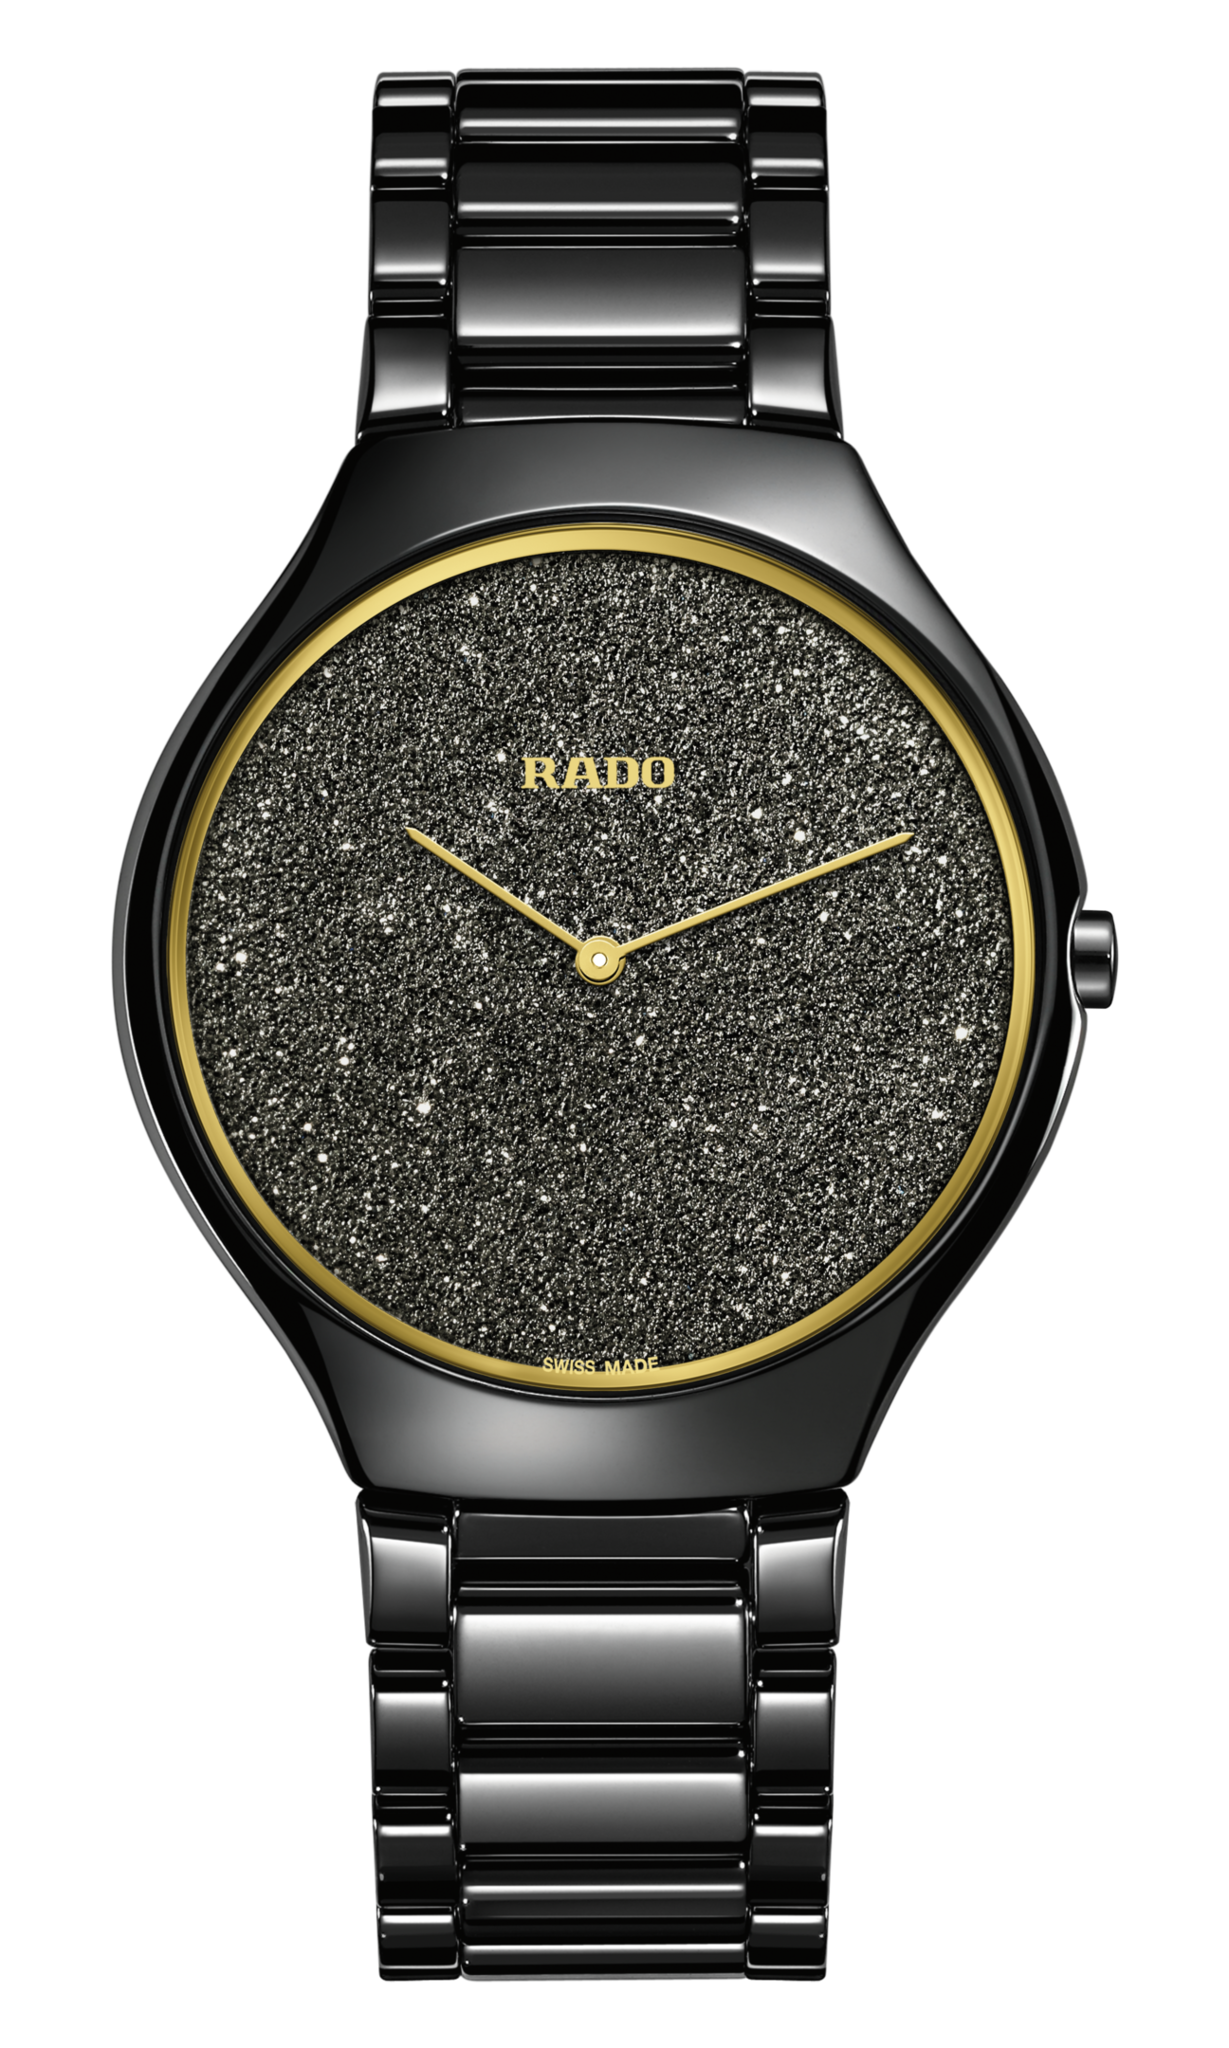 Rado's Great Gardens of the World Watches - First Class Watches Blog